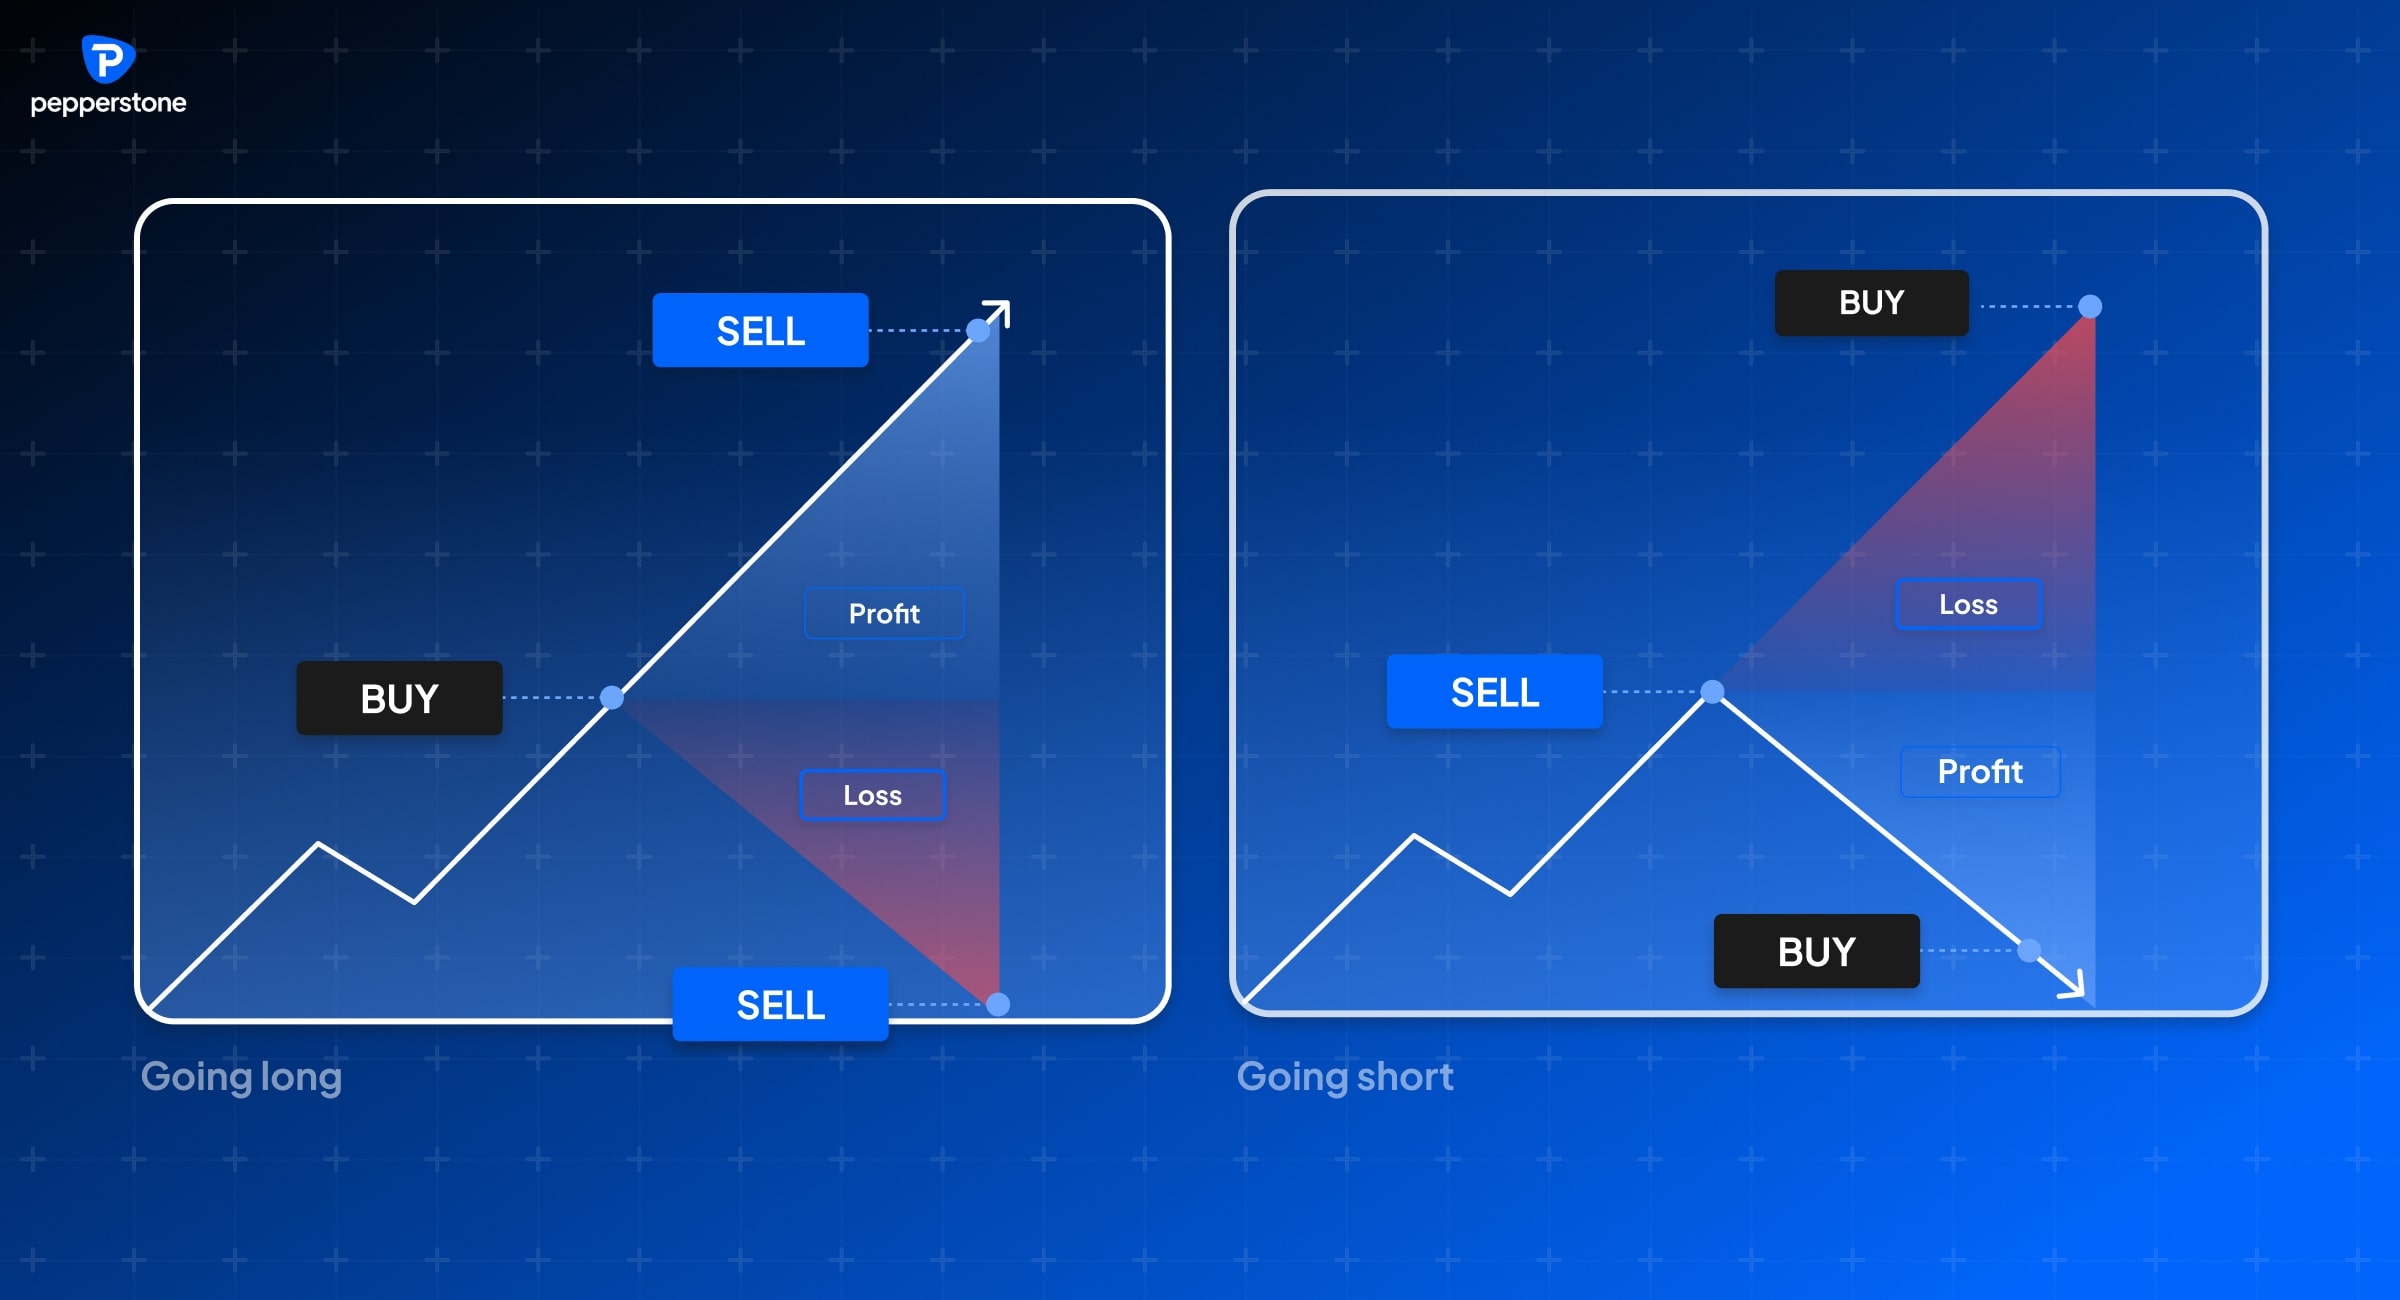 Illustration of going long and going short in trading. The left graph shows 'Going Long' where buying low and selling high leads to profit, while selling low results in a loss. The right graph shows 'Going Short' where selling high and buying low leads to profit, while buying high results in a loss.